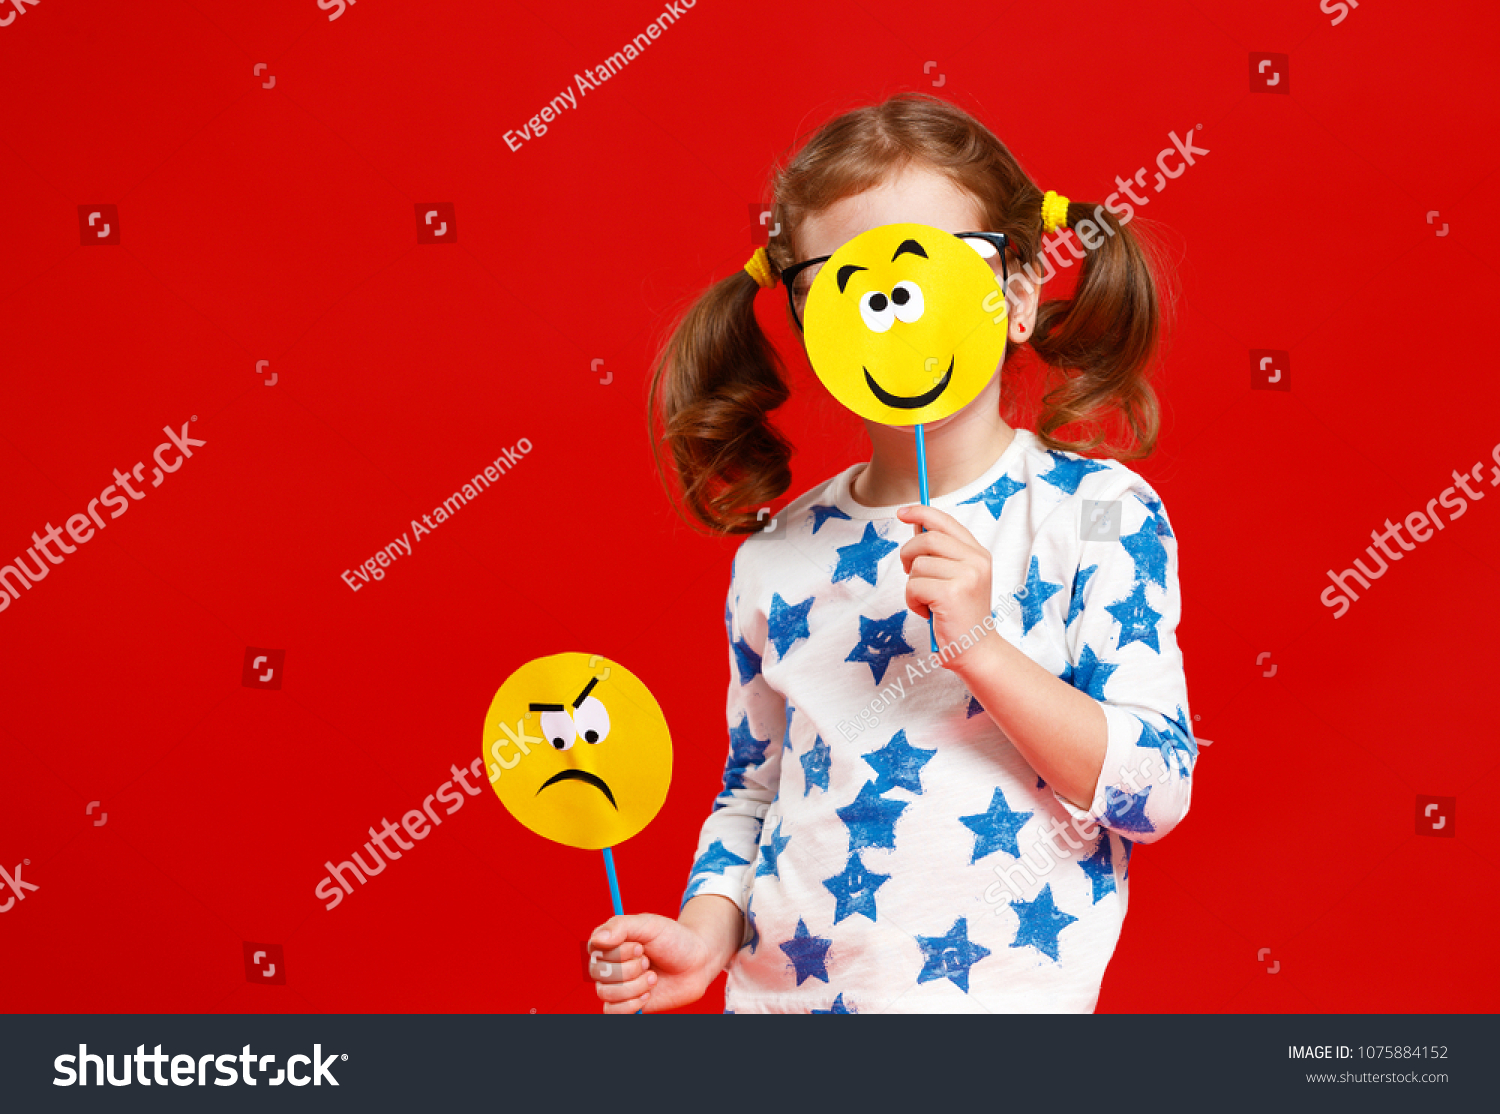 concept of children's emotions. child girl chooses between a sad and joyful smile on  colored red background
 #1075884152